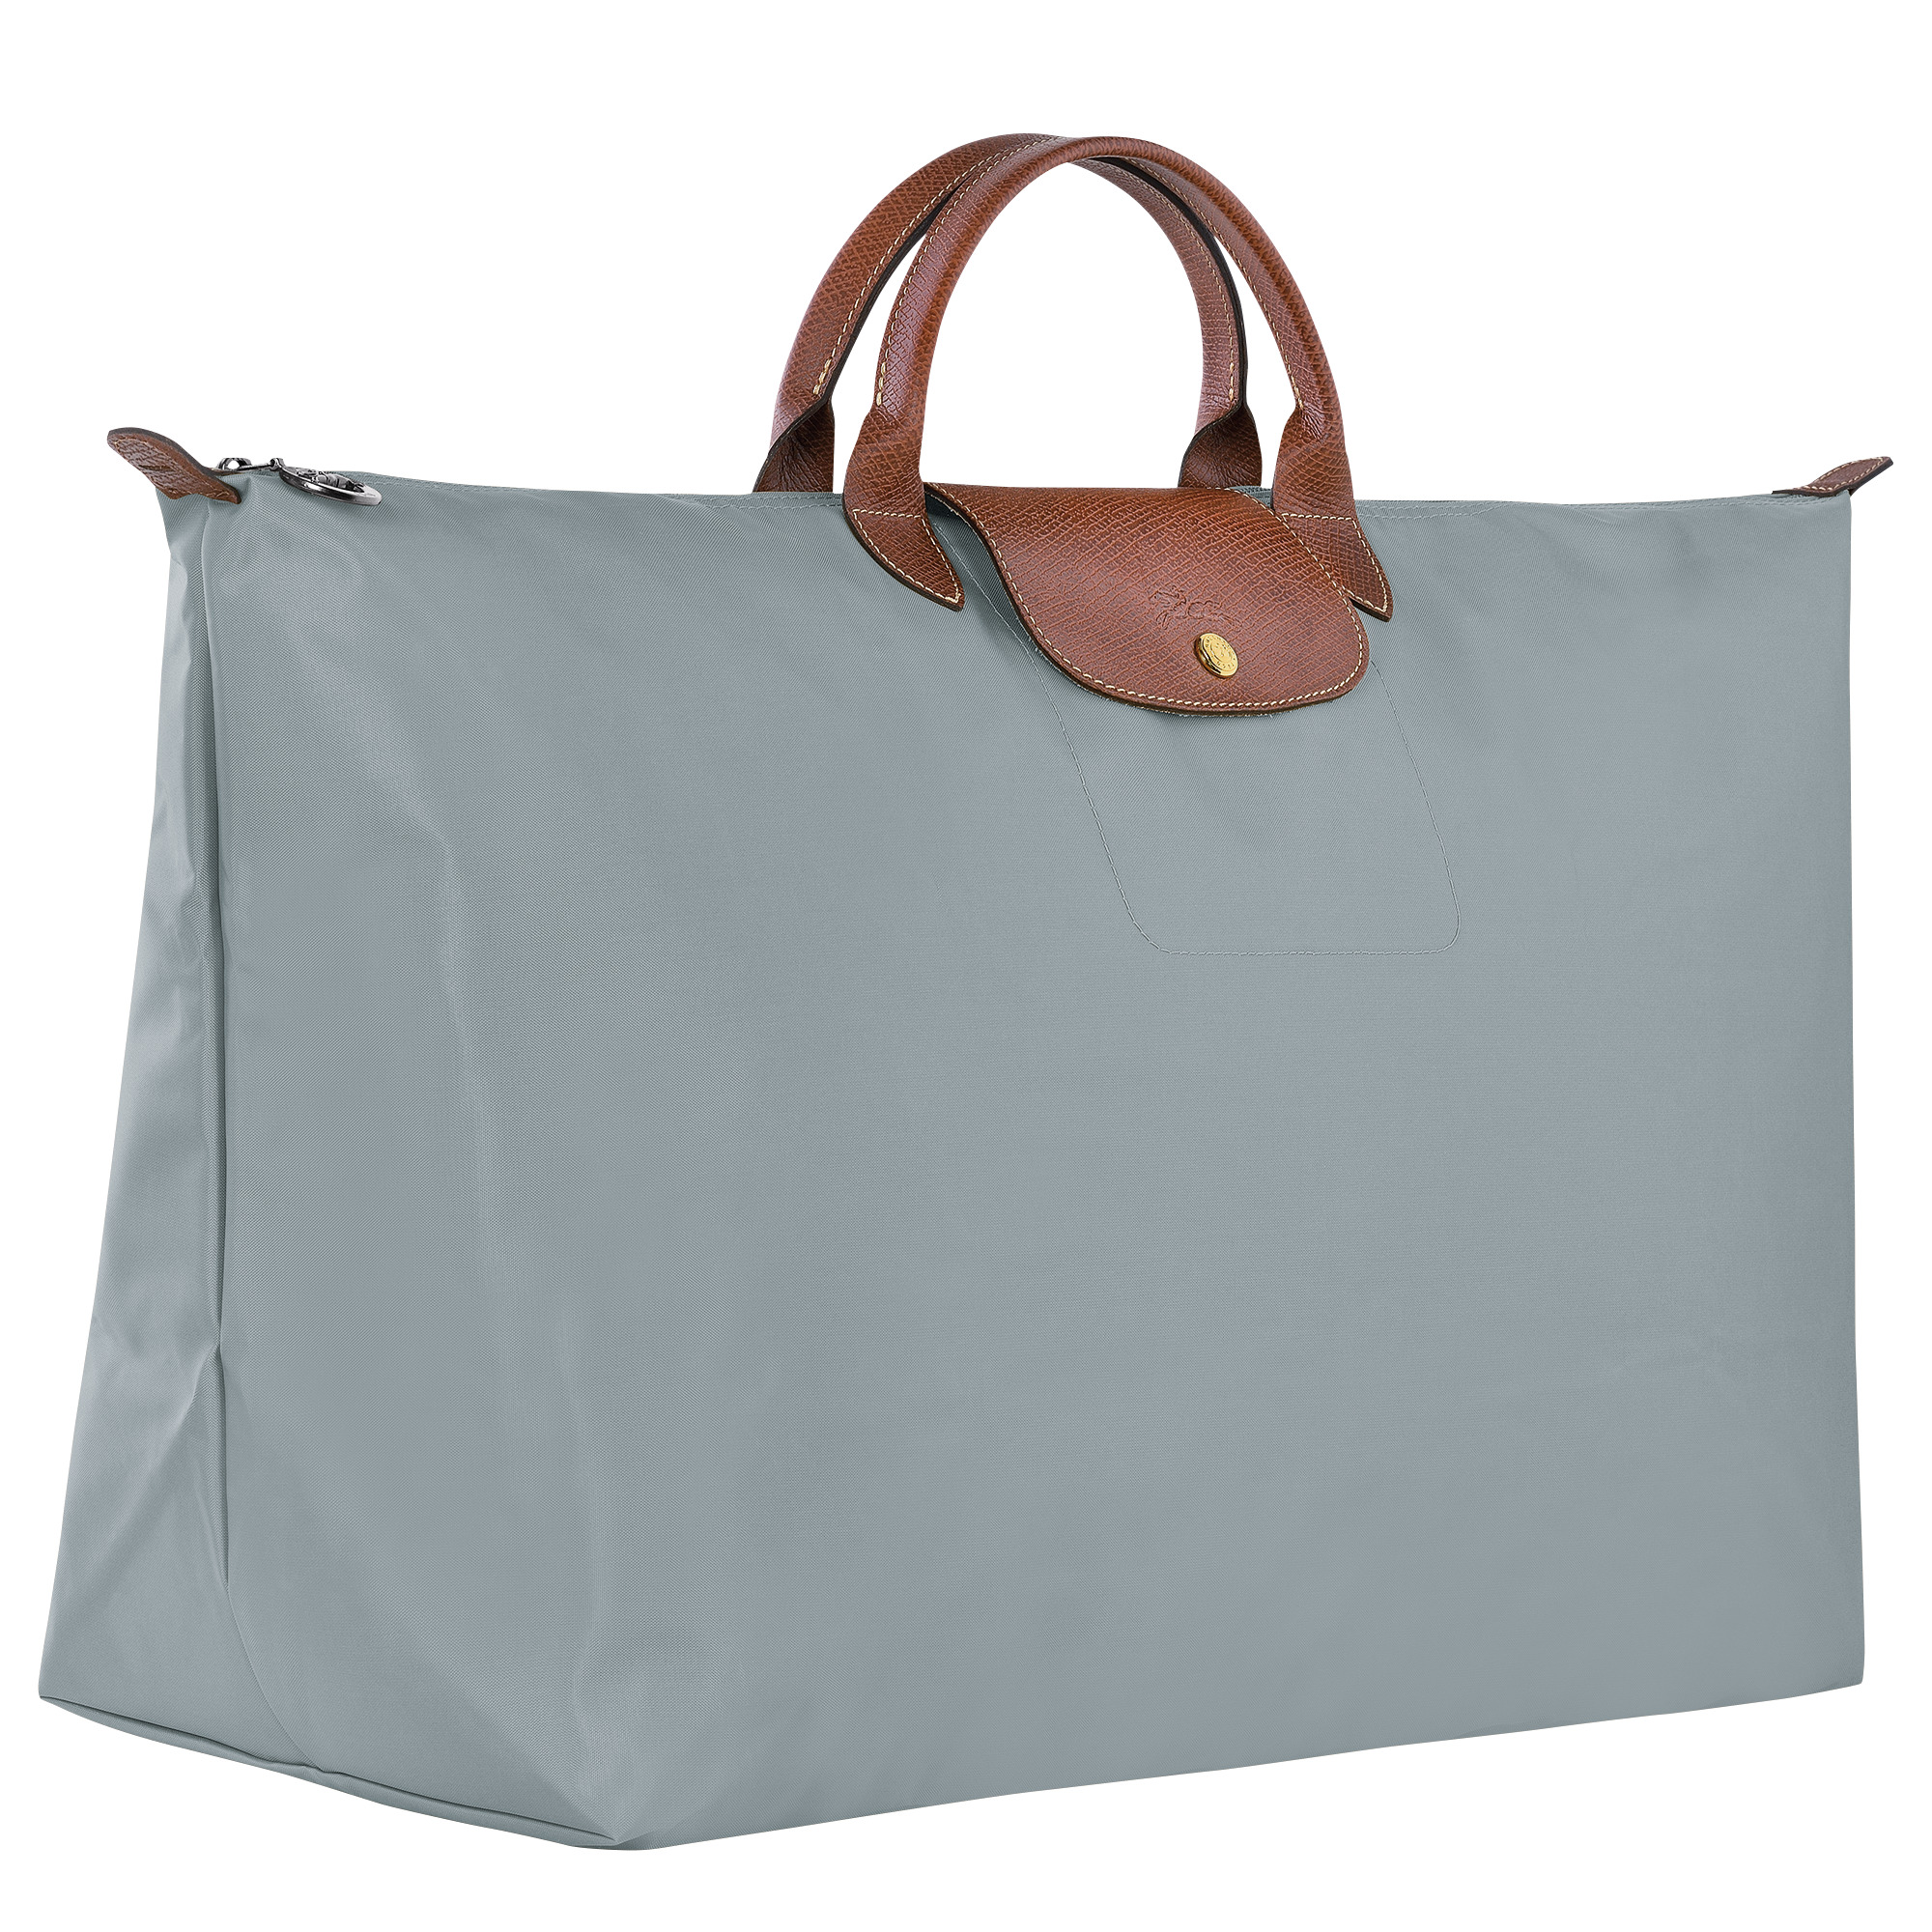 Le Pliage Original M Travel bag Steel - Recycled canvas - 2